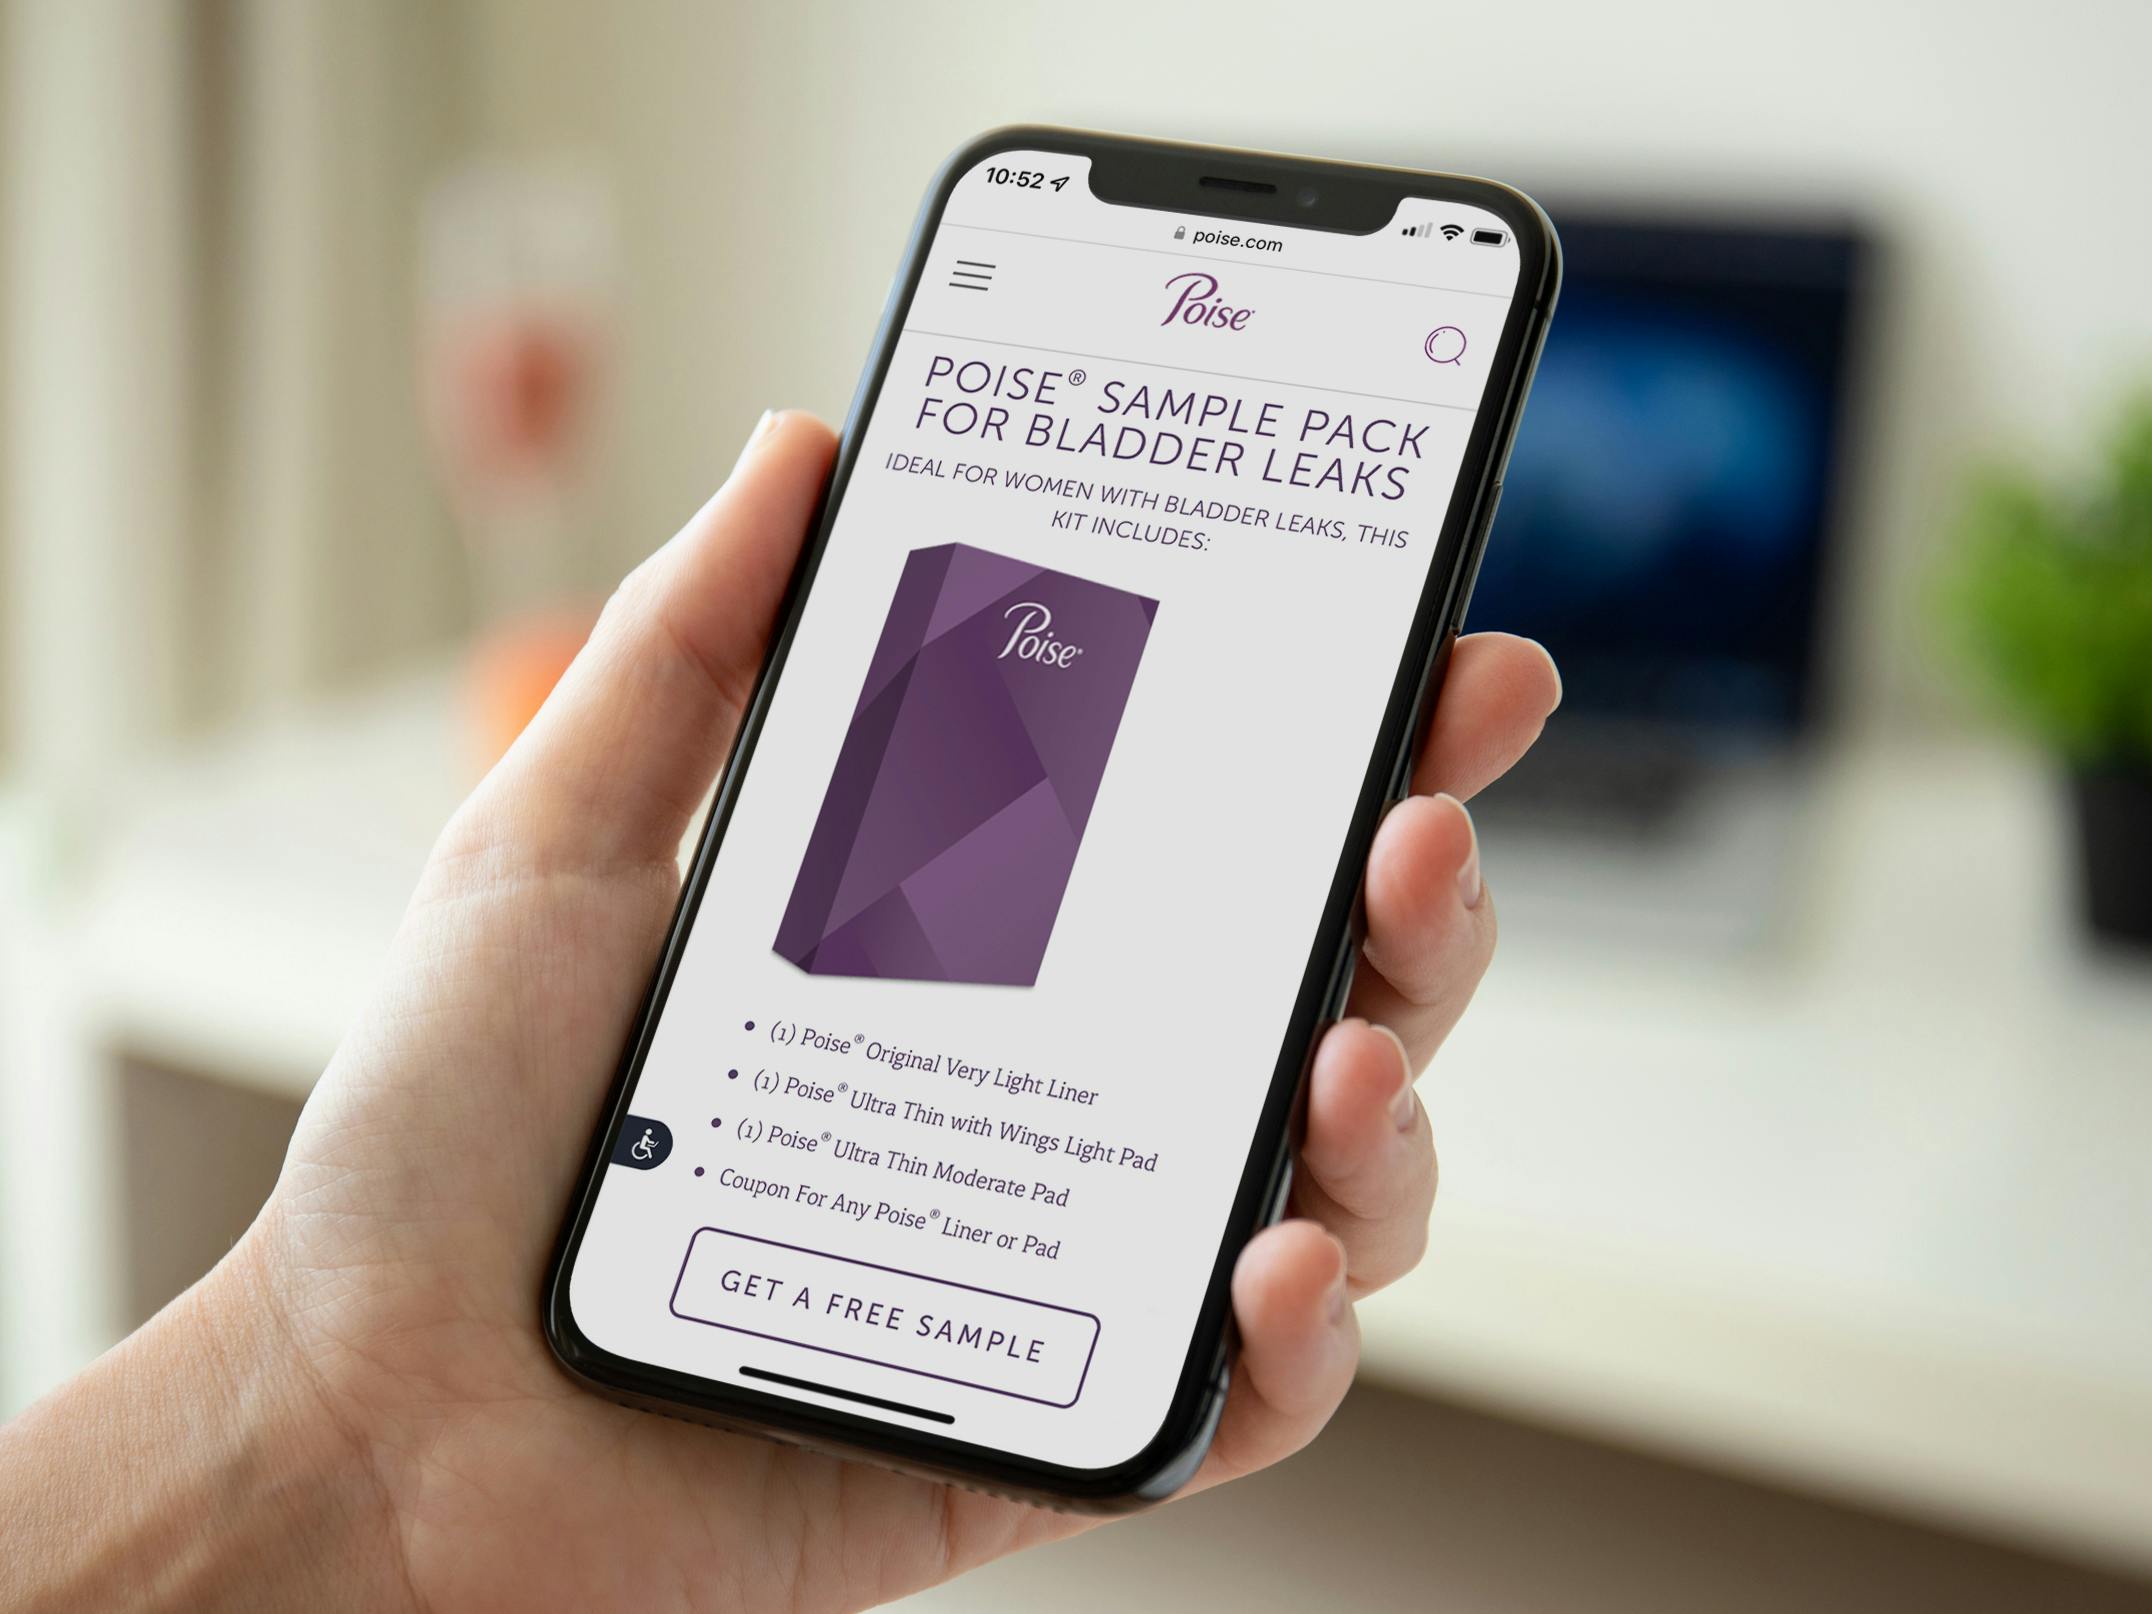 A woman's hand holding an iPhone displaying the Poise free sample page on their website.